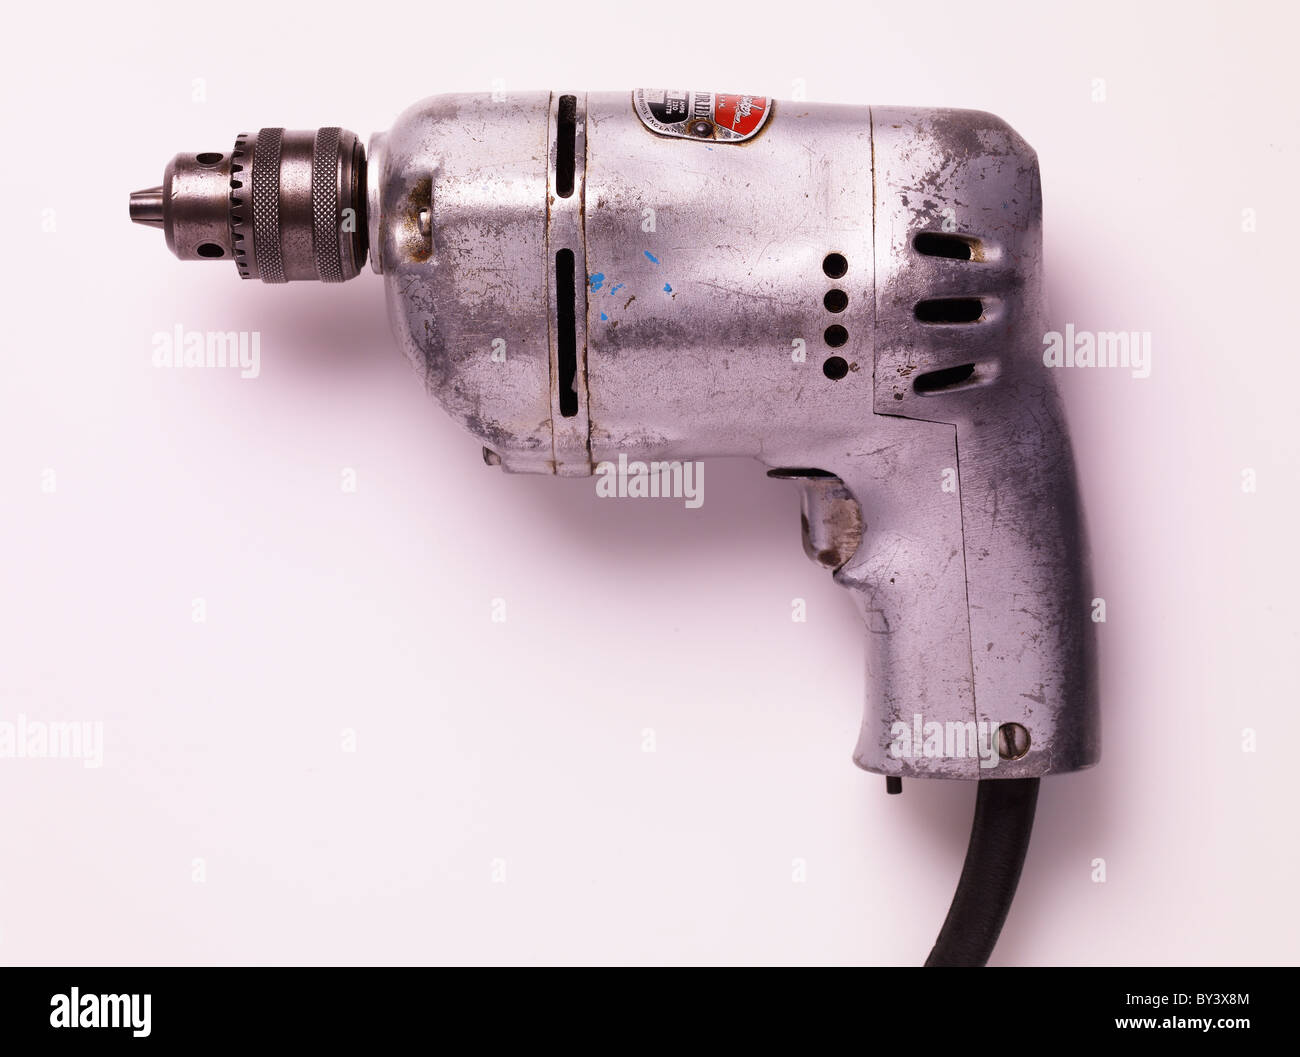 https://c8.alamy.com/comp/BY3X8M/vintage-black-and-decker-electric-drill-BY3X8M.jpg